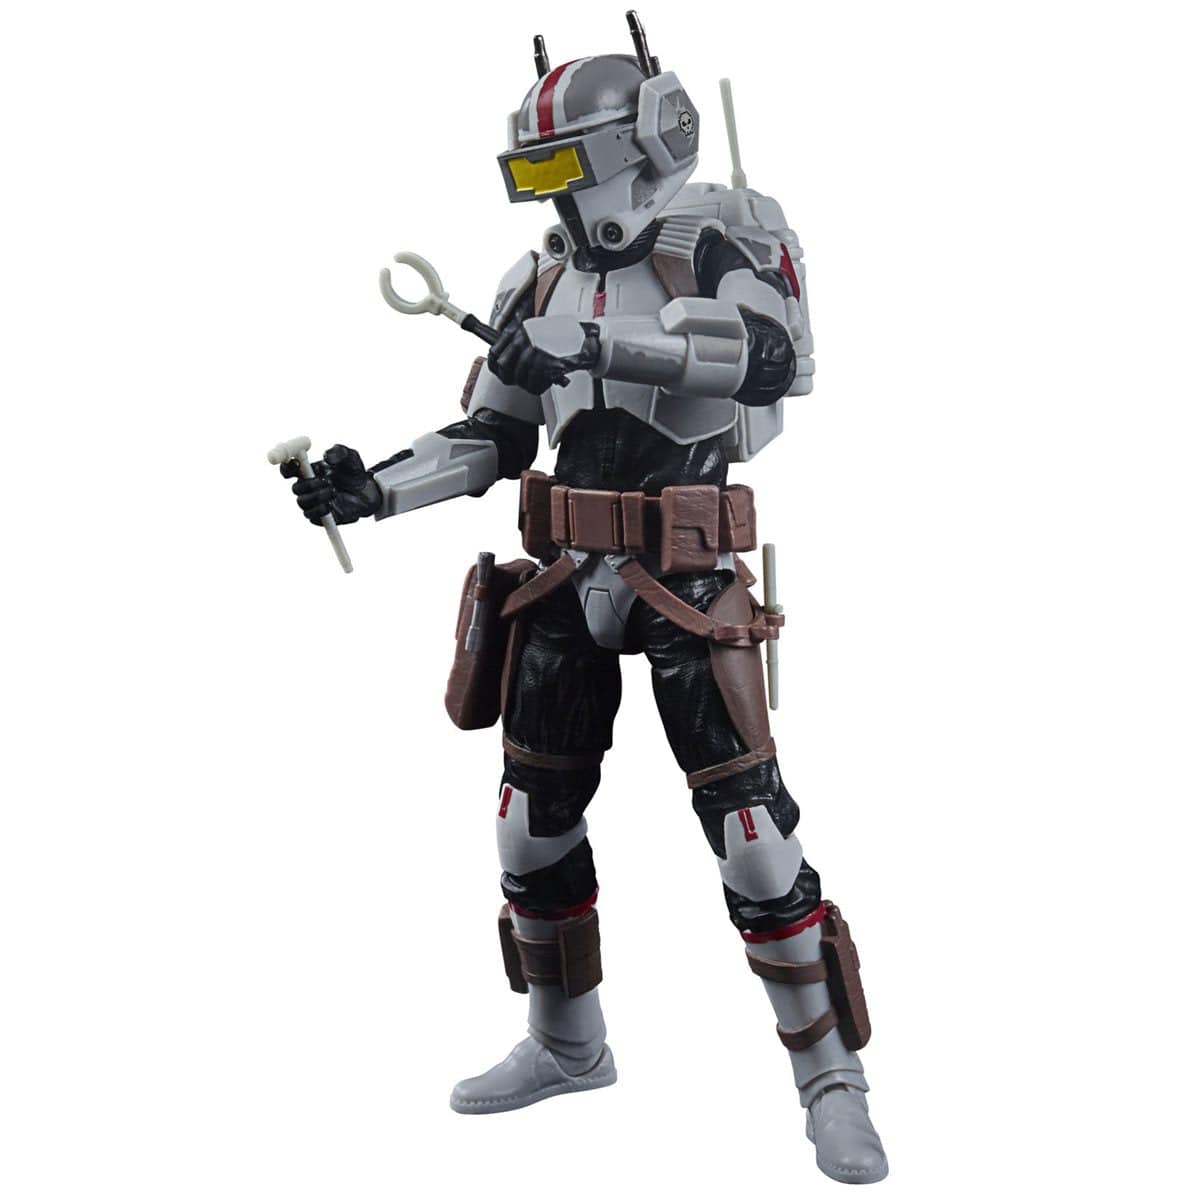 Star Wars The Black Series Tech Toy 6-Inch-Scale Star Wars: The Bad Batch Collectible Figure Media 2 of 10